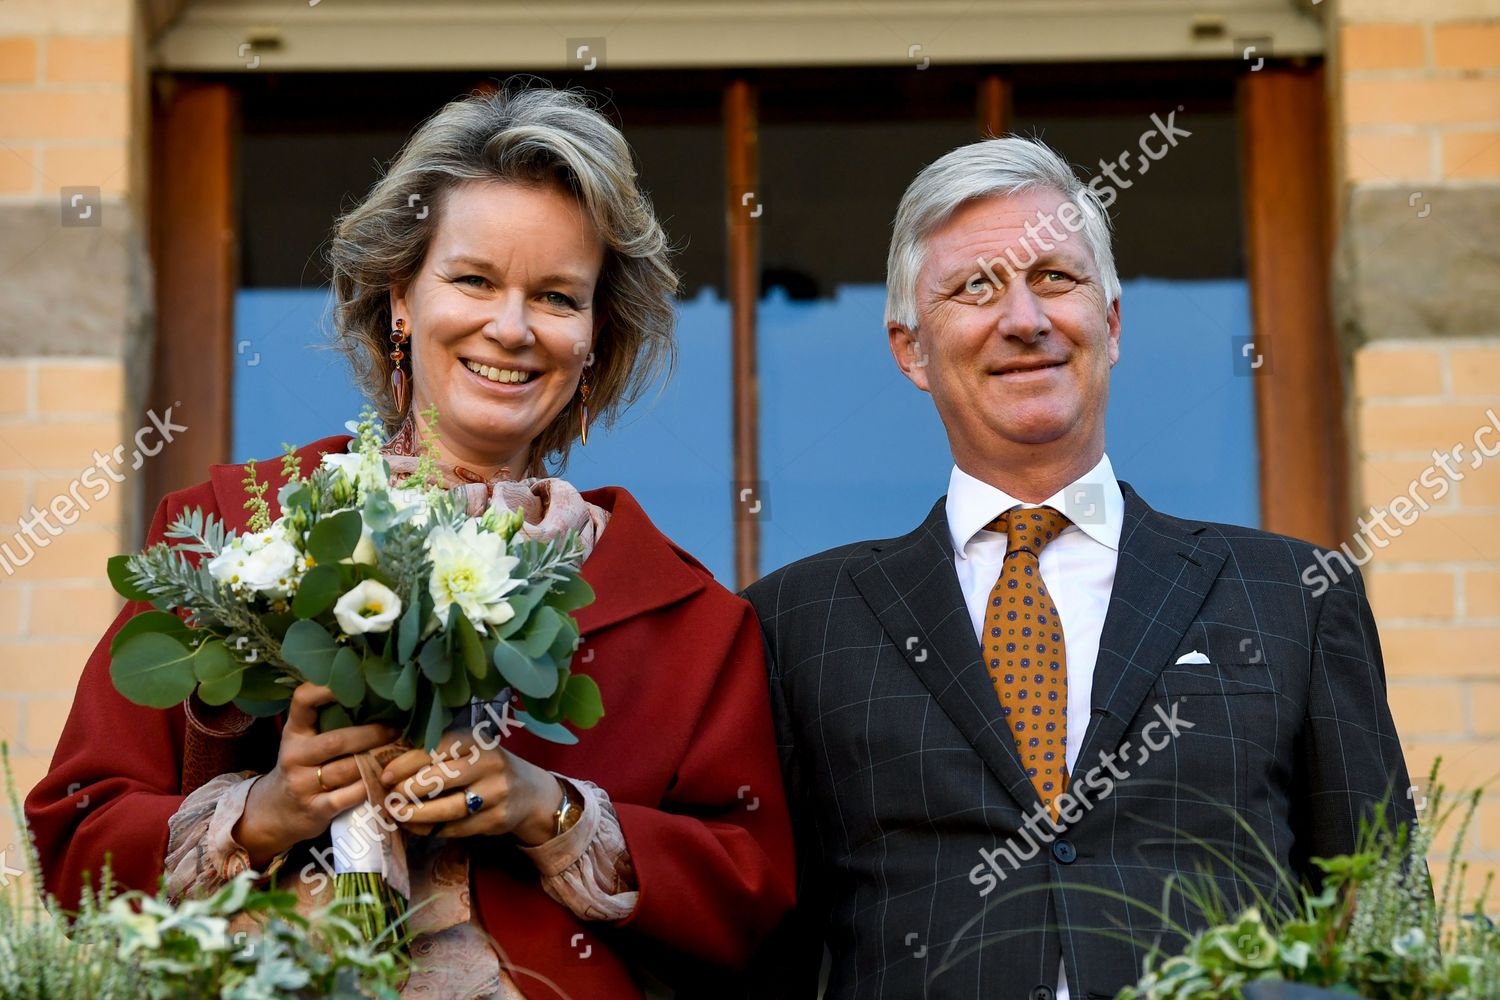 queen-mathilde-and-king-philippe-visit-the-province-of-luxembourg-vielsalm-belgium-shutterstock-editorial-12529850ba.jpg